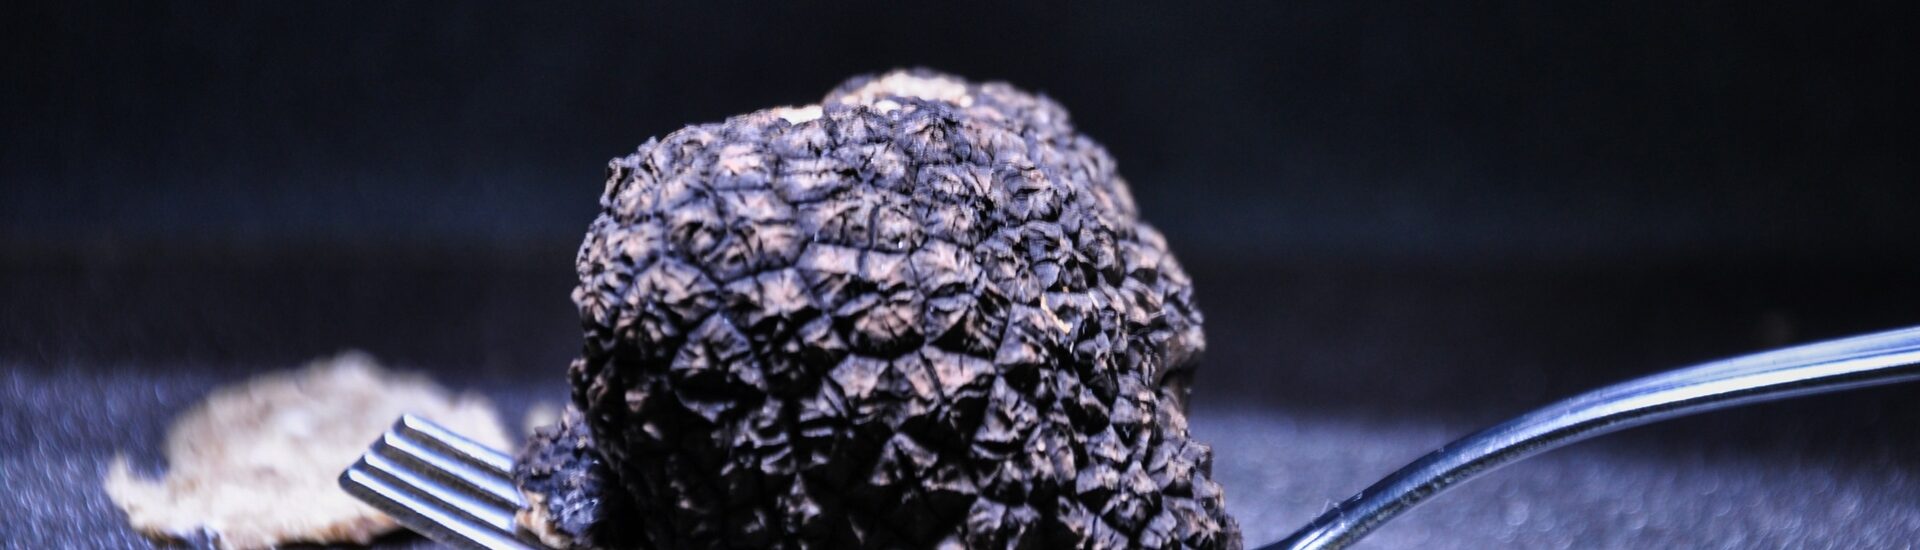 Understanding Basic Principles for Black Truffle Cultivation by Christine Fischer